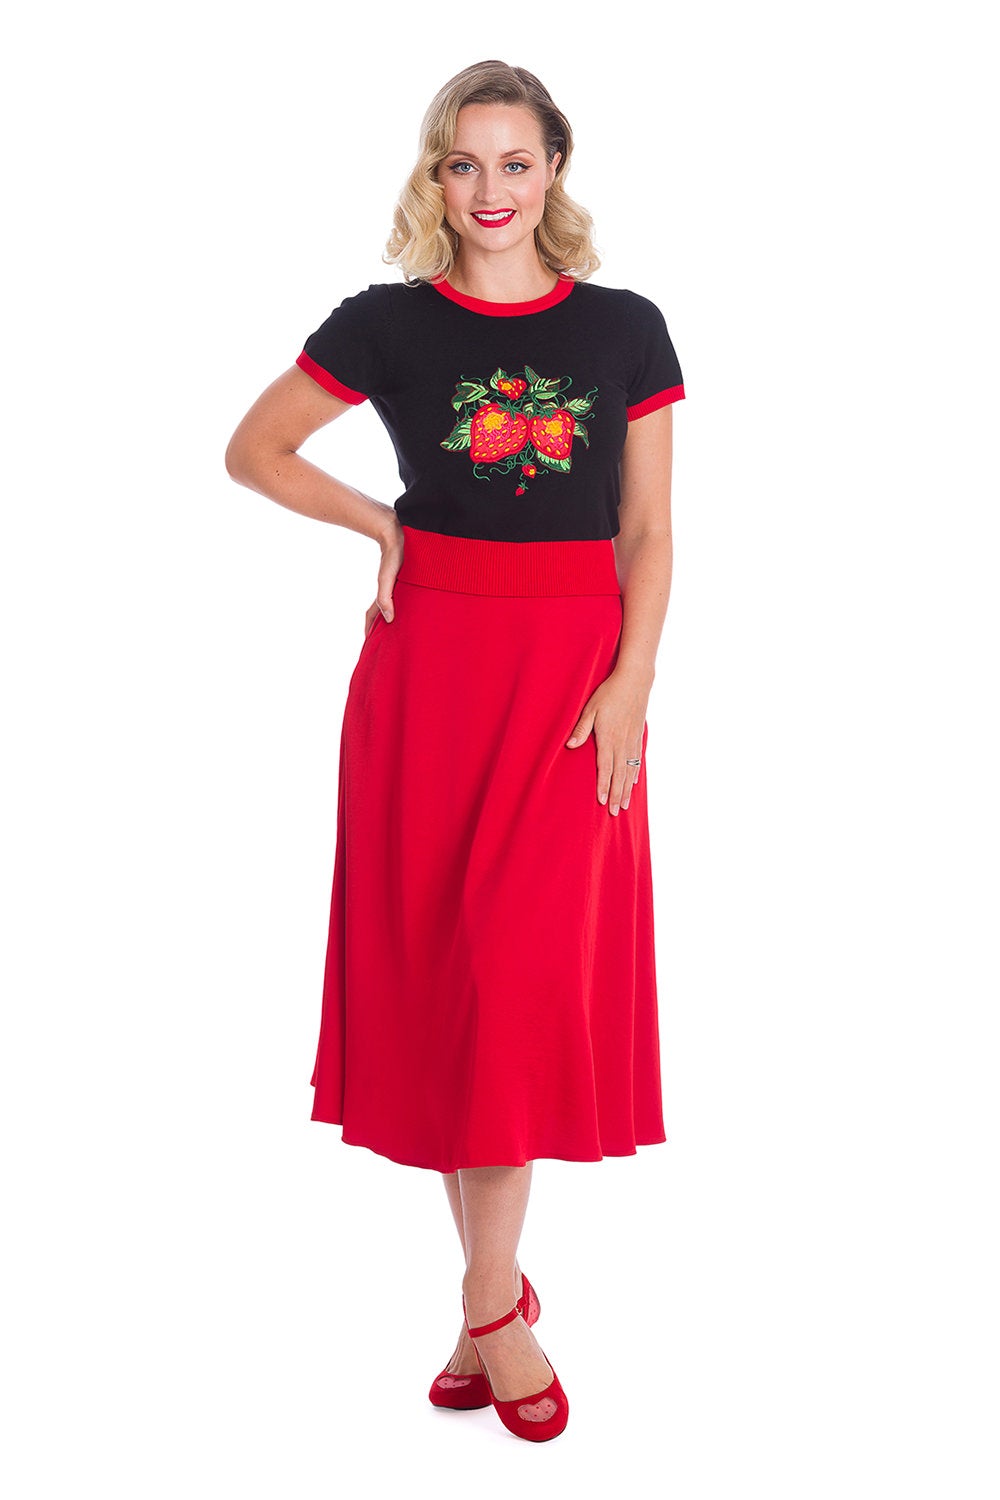 Strawberry Fields Embroidered Top by Banned Apparel - Minimum Mouse